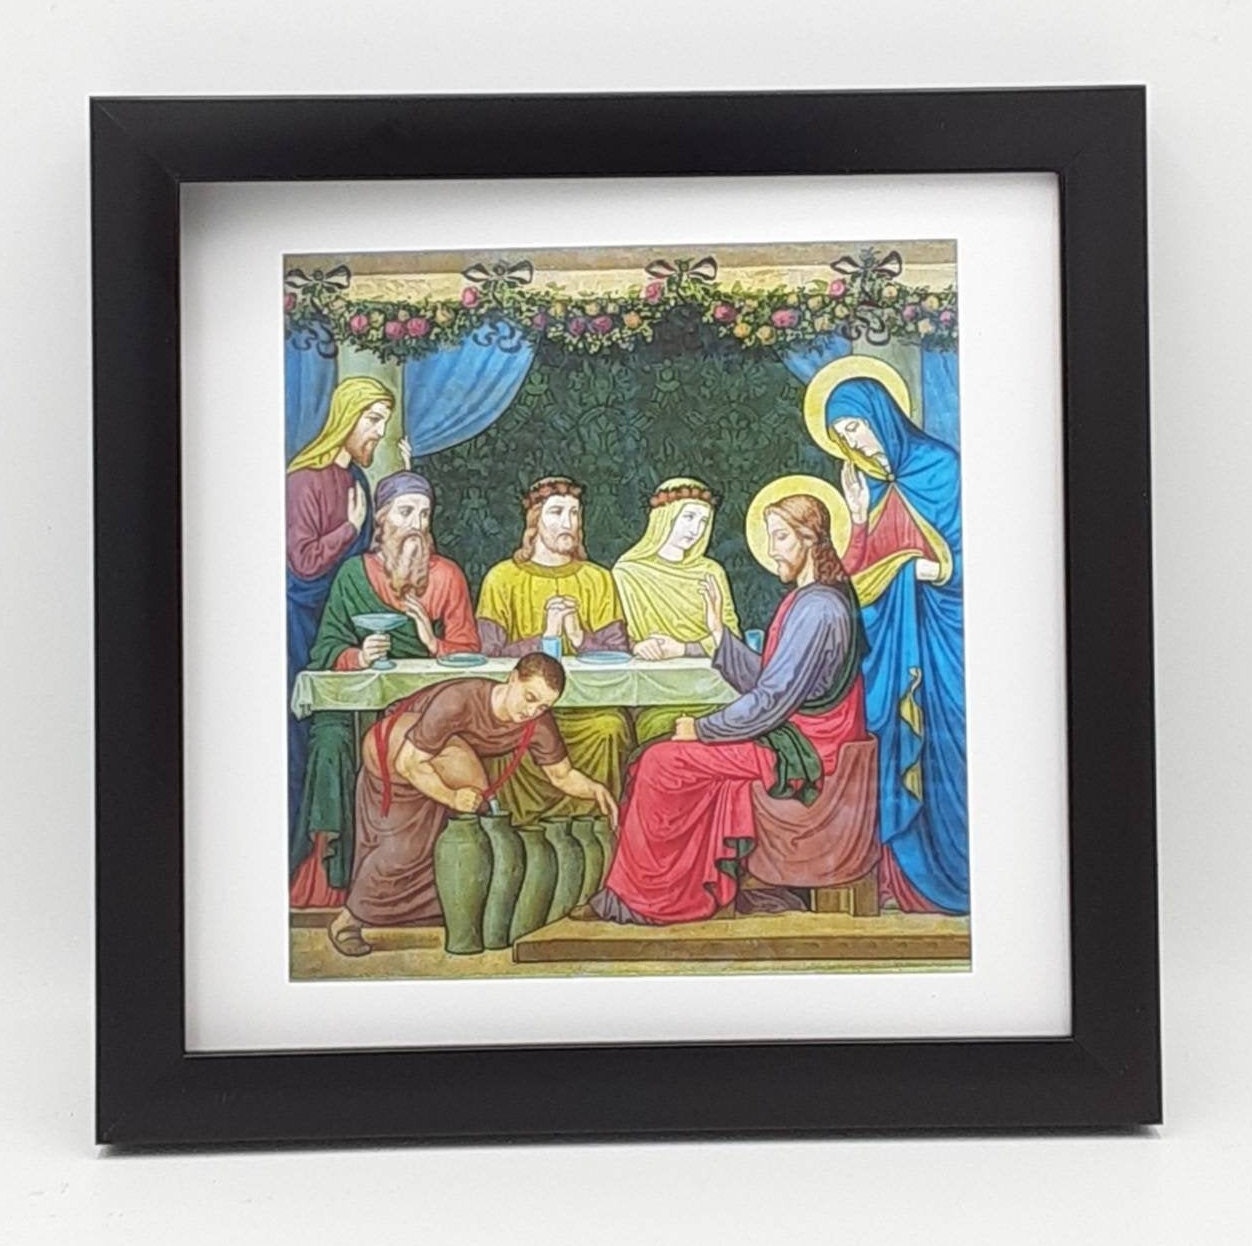 Wedding at Cana – Wedding Gift/Anniversary Gift – painted by Benedictine Monks– Catholic Art Print – Archival Quality